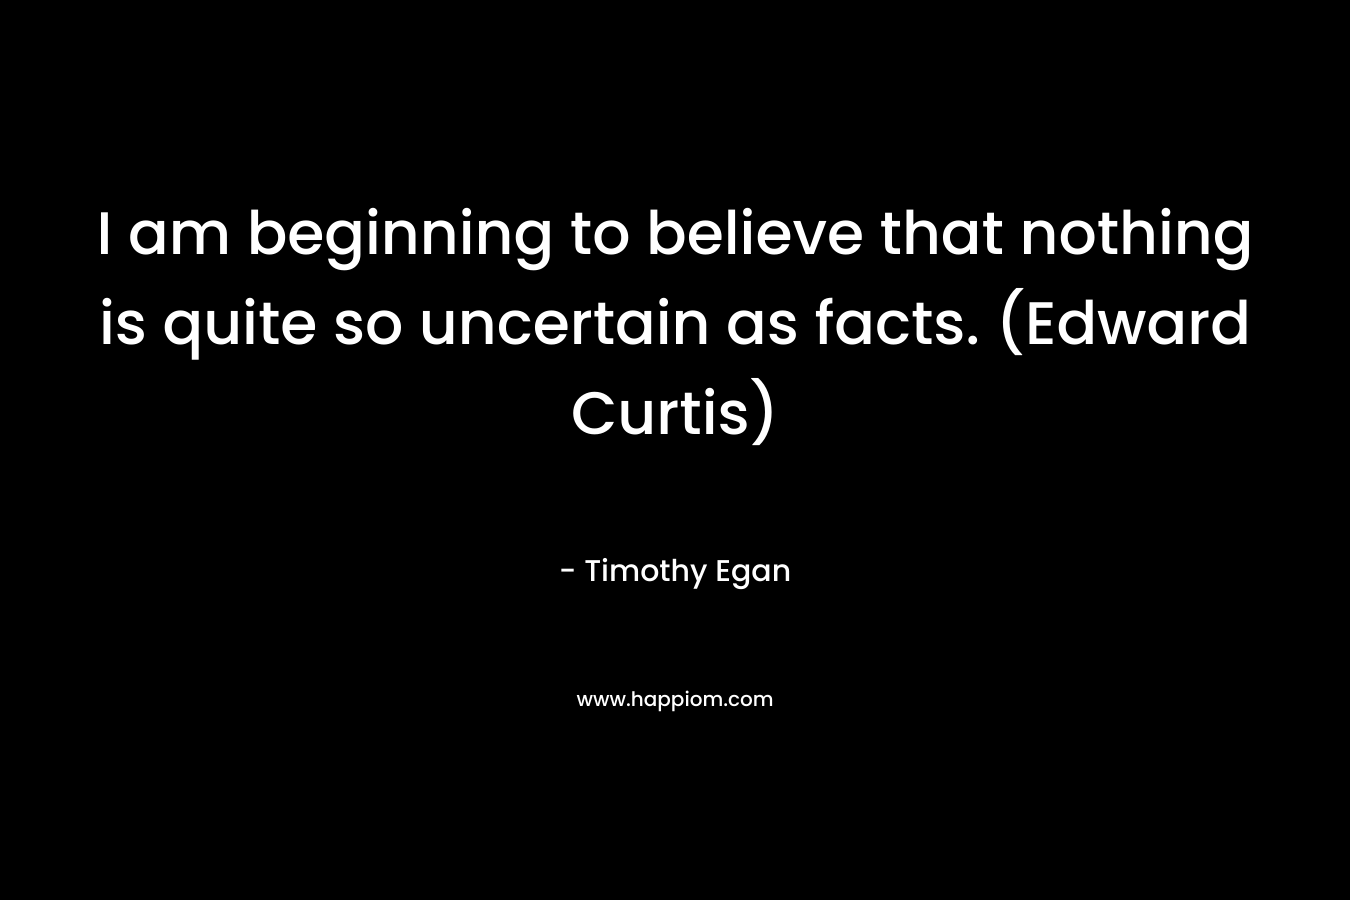 I am beginning to believe that nothing is quite so uncertain as facts. (Edward Curtis)